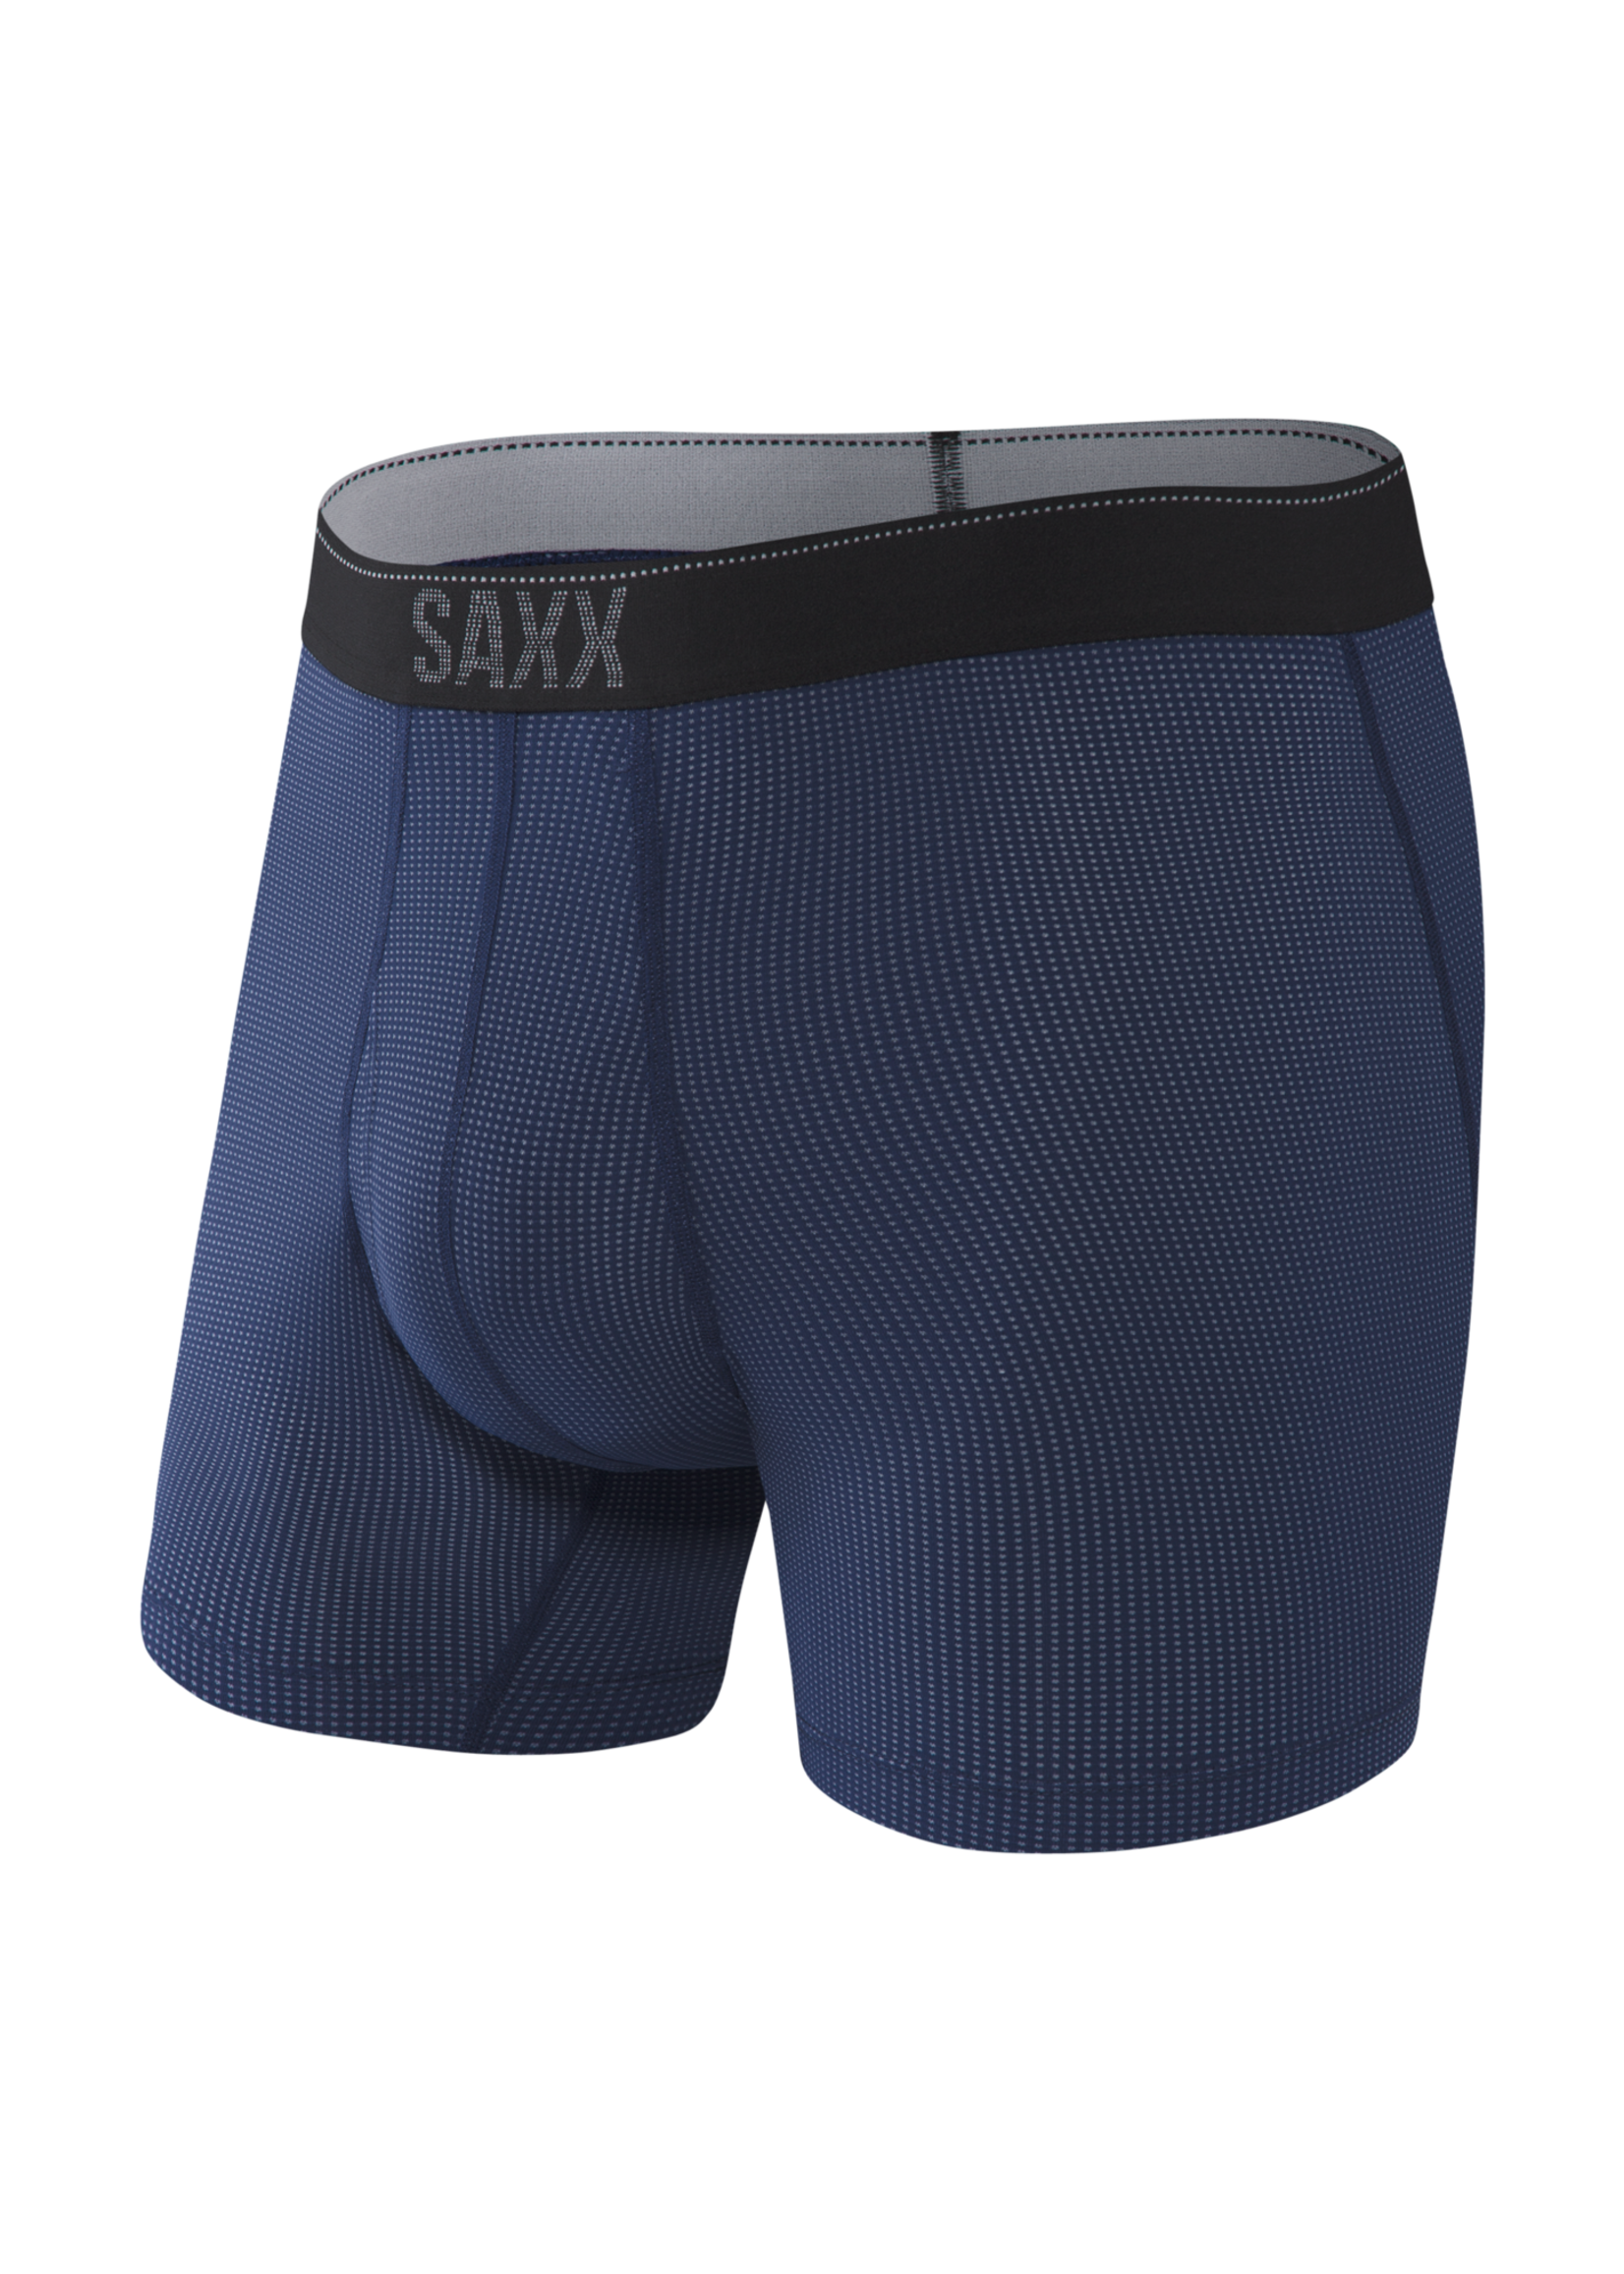 Saxx QUEST BOXER MODERN FLY- MB2, MOB, OR BL2